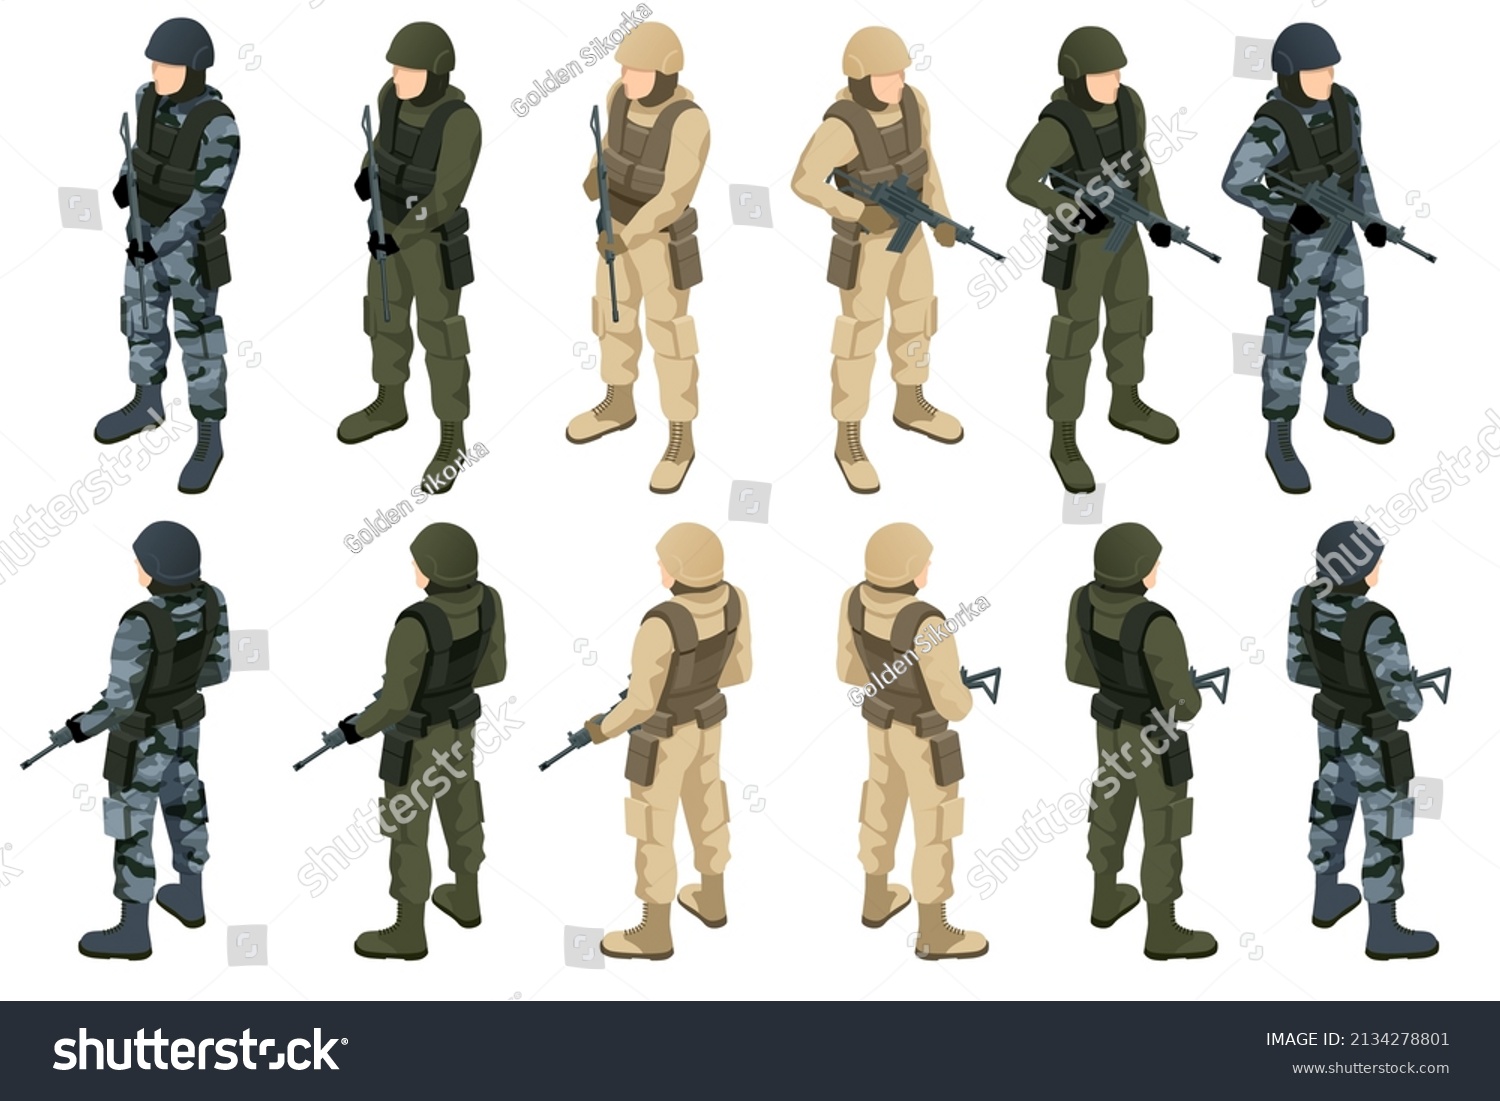 Isometric Soldier Camouflage Soldiers Assault Rifles Stock Vector ...